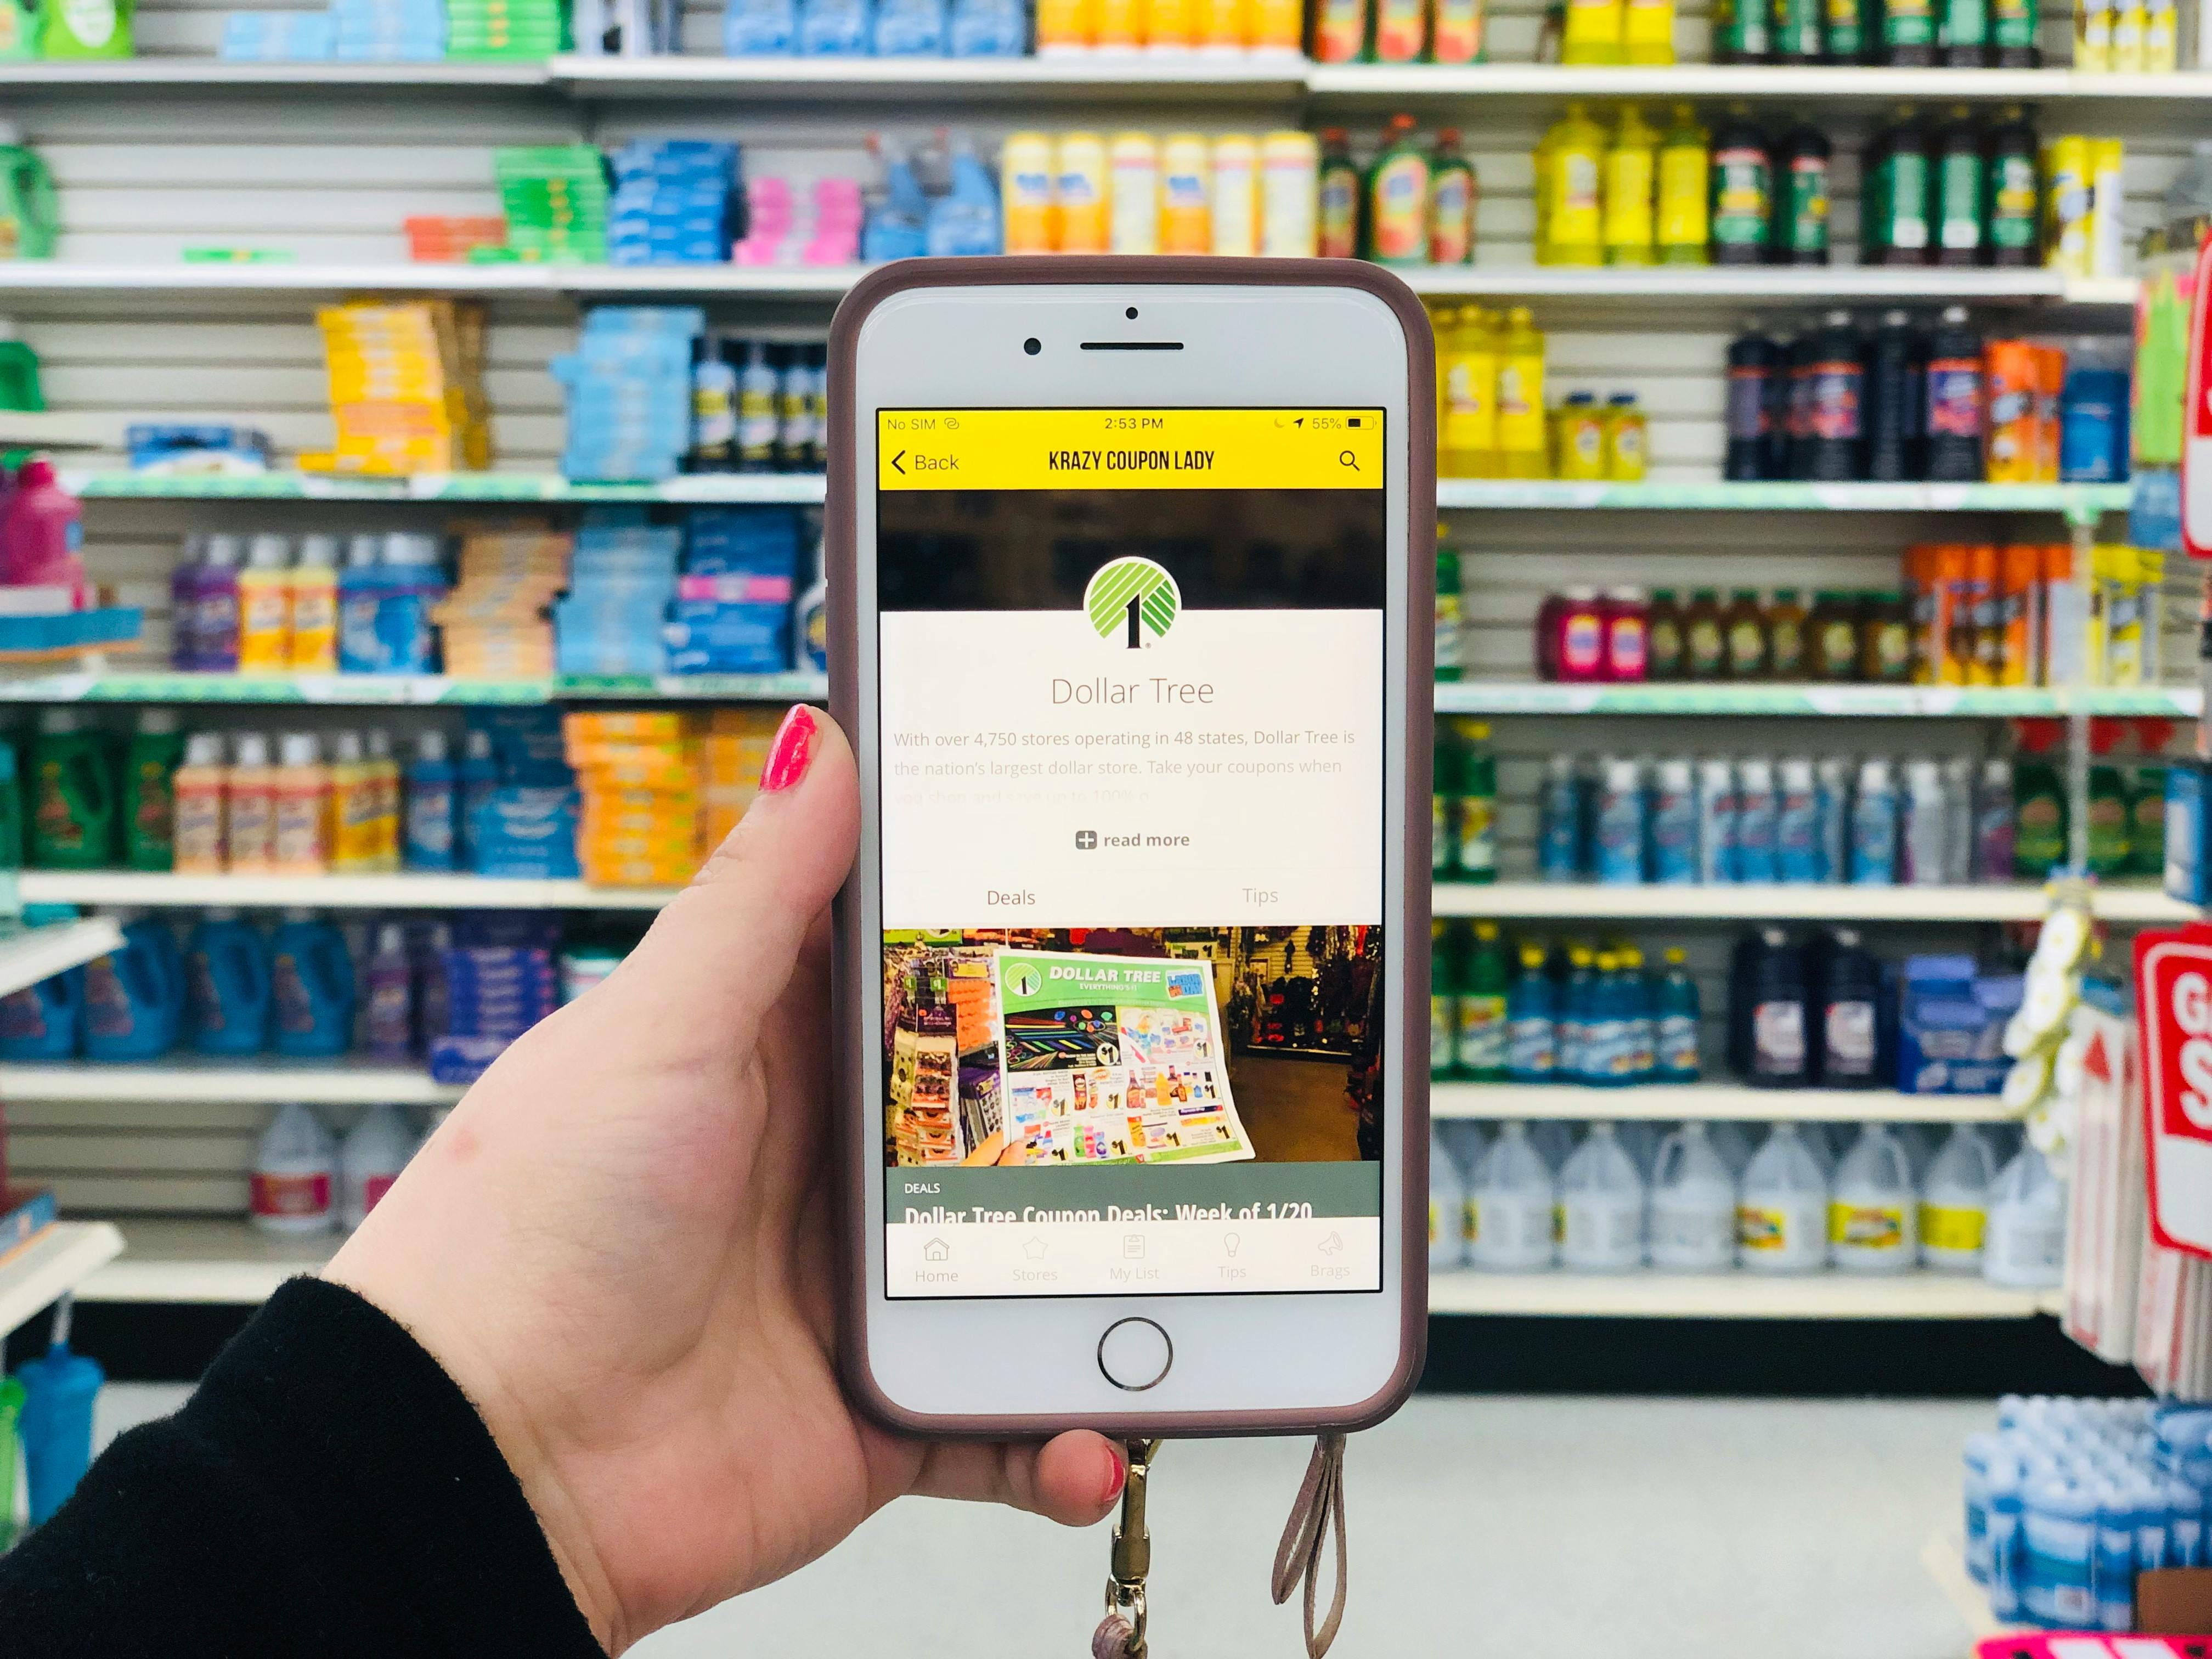 The Krazy Coupon Lady app: Apps You Should Use at Dollar Tree to Get Free Stuff